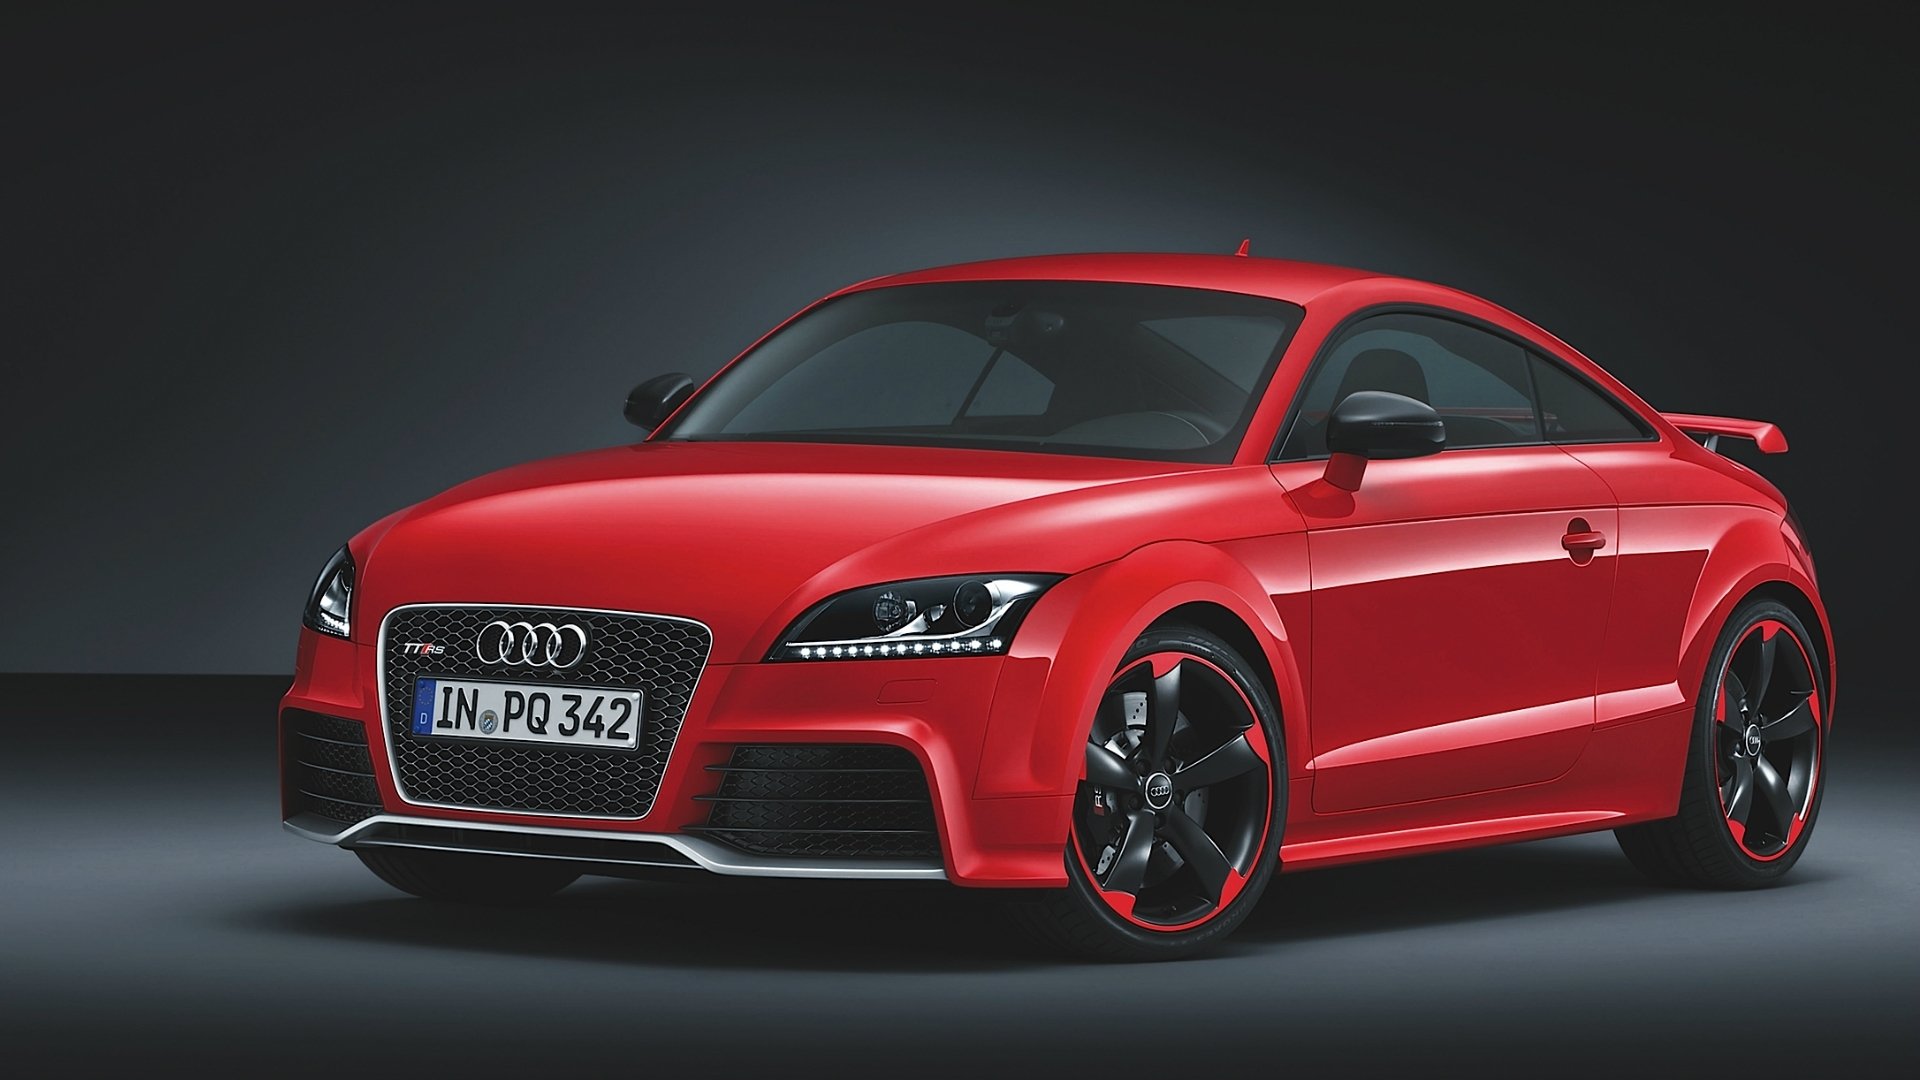 General 1920x1080 Audi TT car Audi numbers red cars vehicle Audi TTRS coupe German cars Volkswagen Group